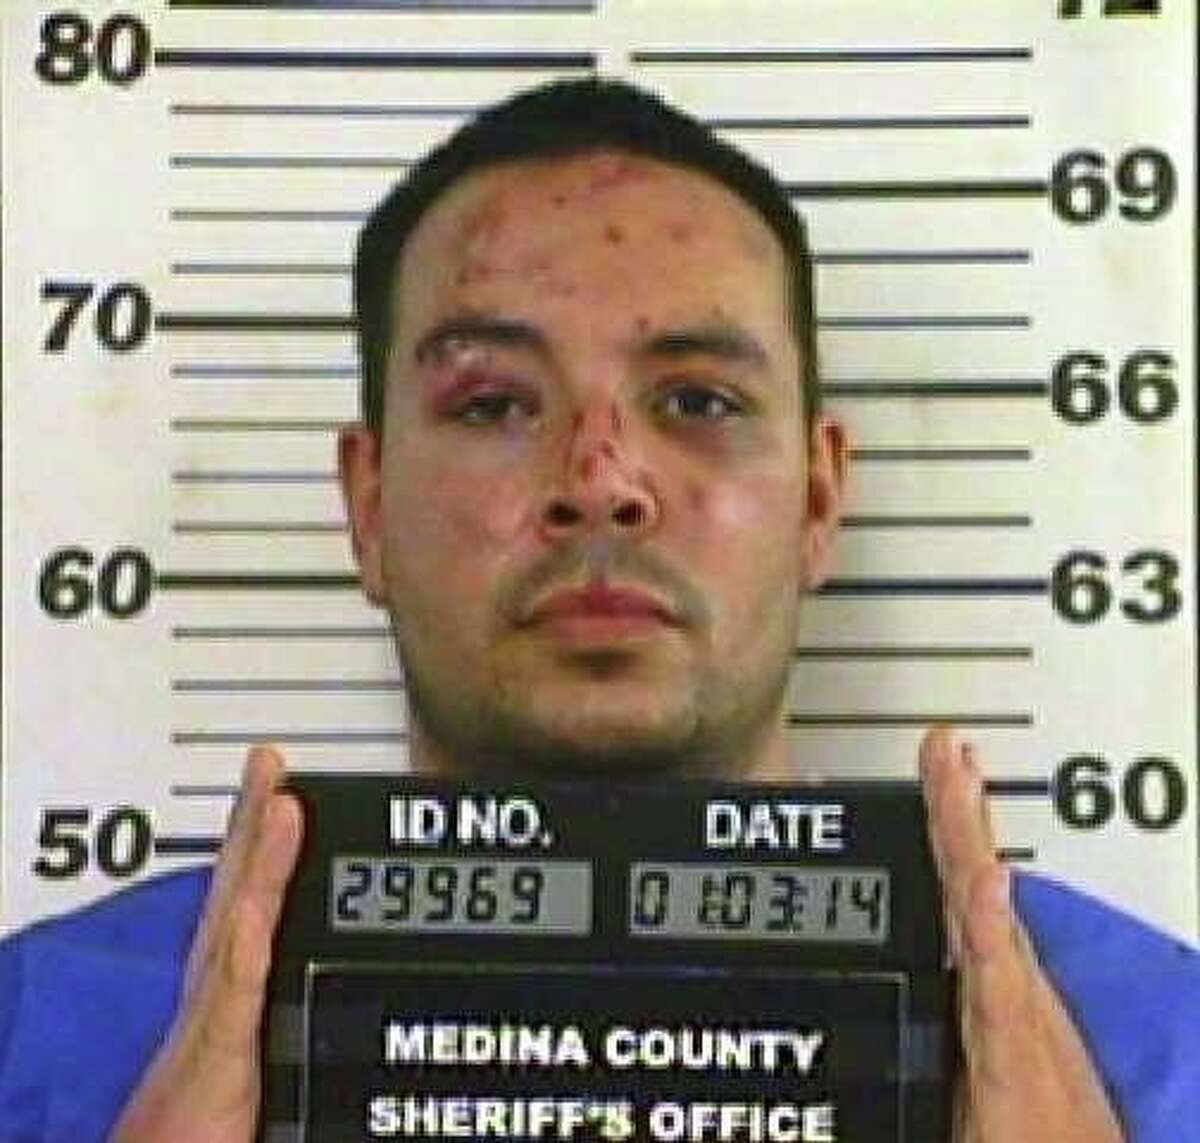 Border patrol agent Adam Scott Garibay is seen in a Jan. 3, 2014 booking mug provided by the Medina County Sheriff's department. Garibay pleaded guilty Nov. 9, 2015 to killing Keith Martin just outside Hondo.